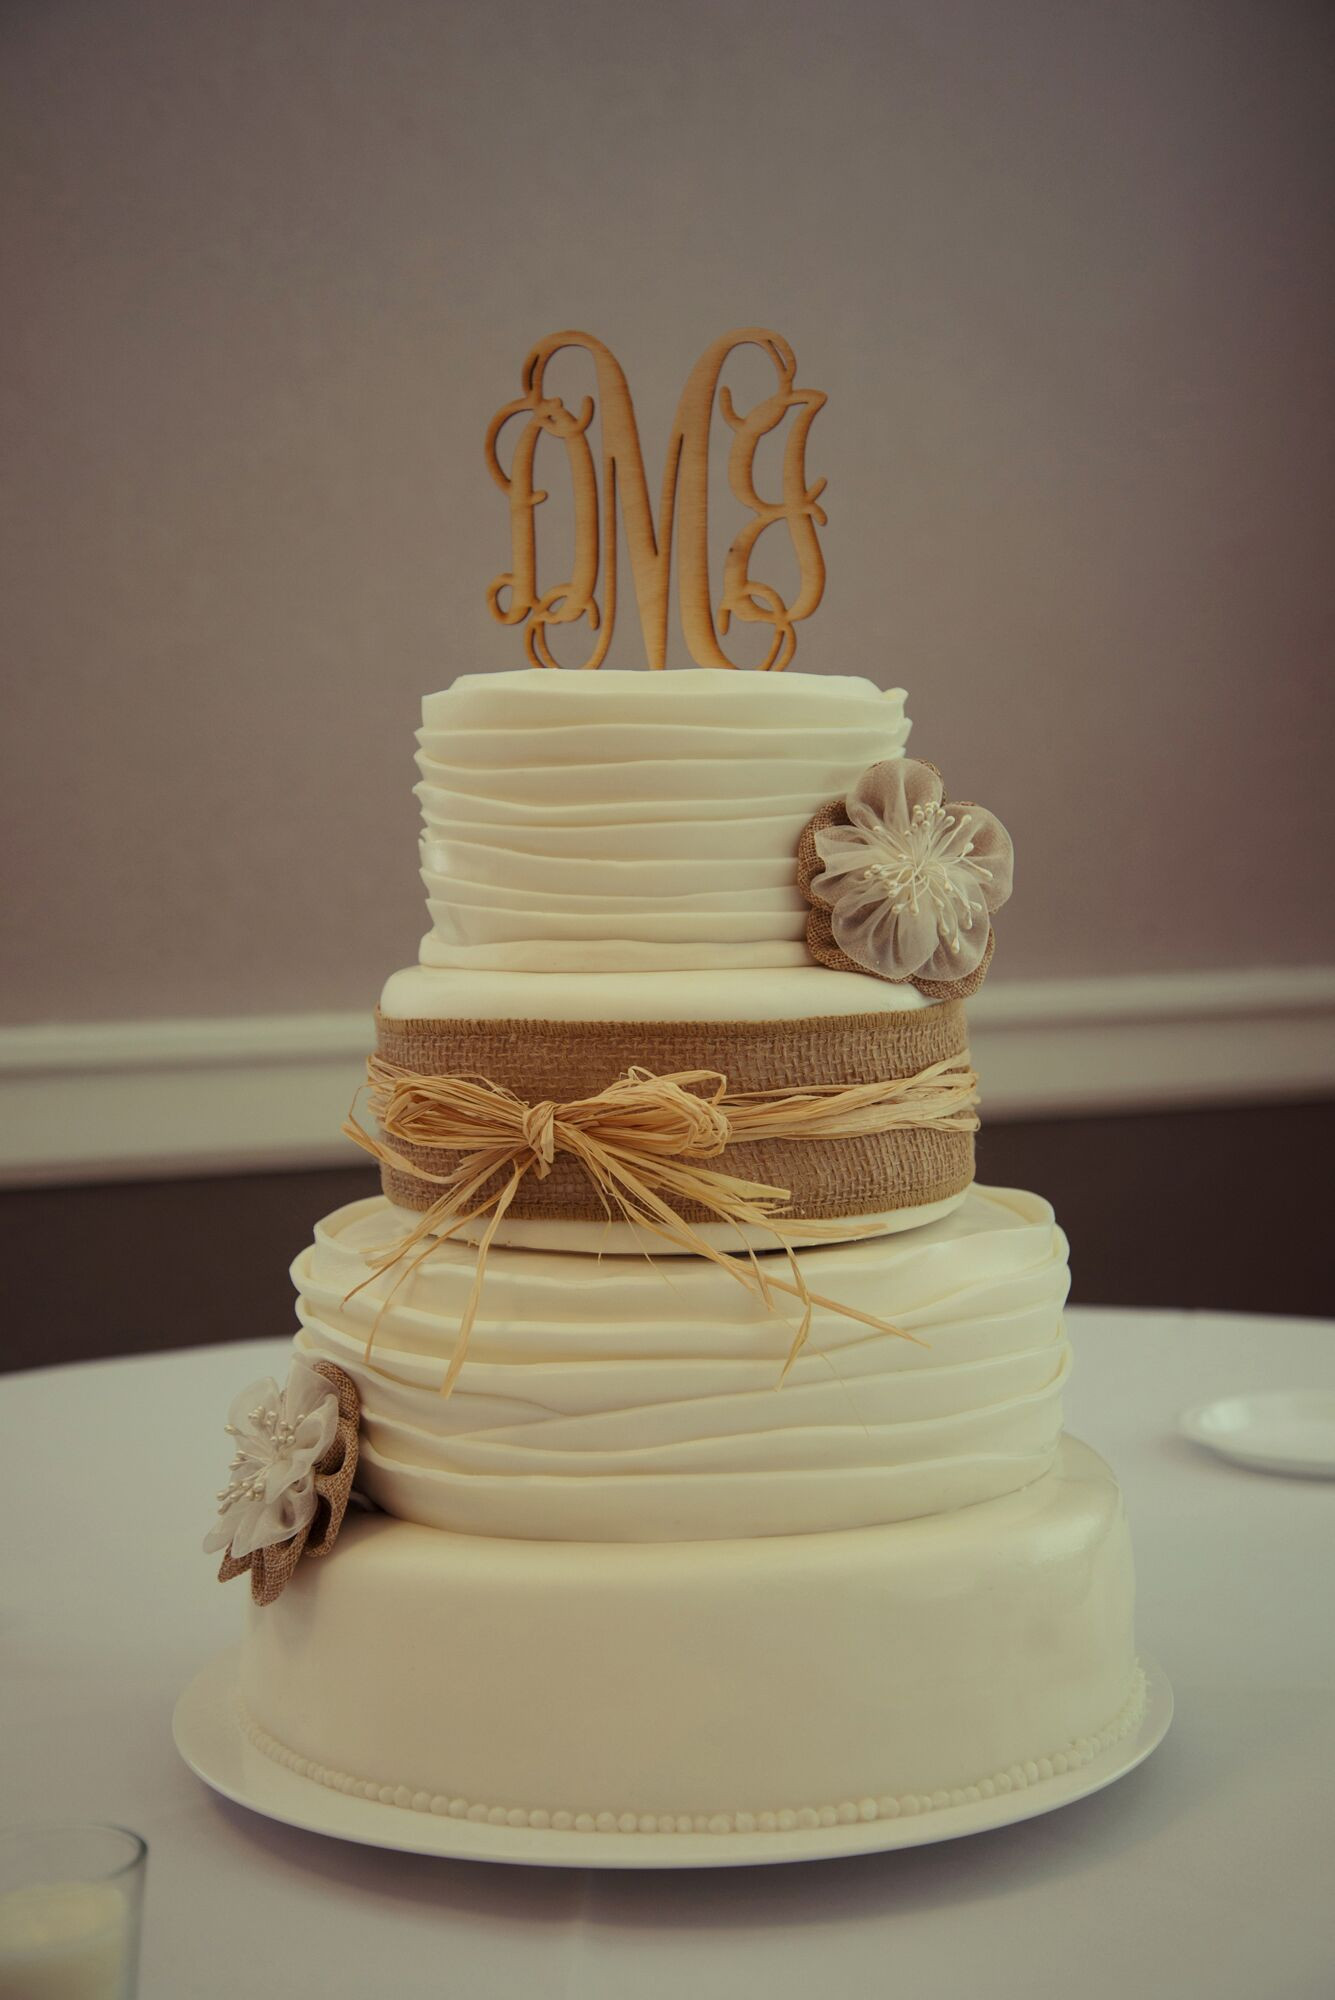 Country Wedding Cake Toppers
 Rustic Wedding Cake with Burlap and Straw Ribbon and